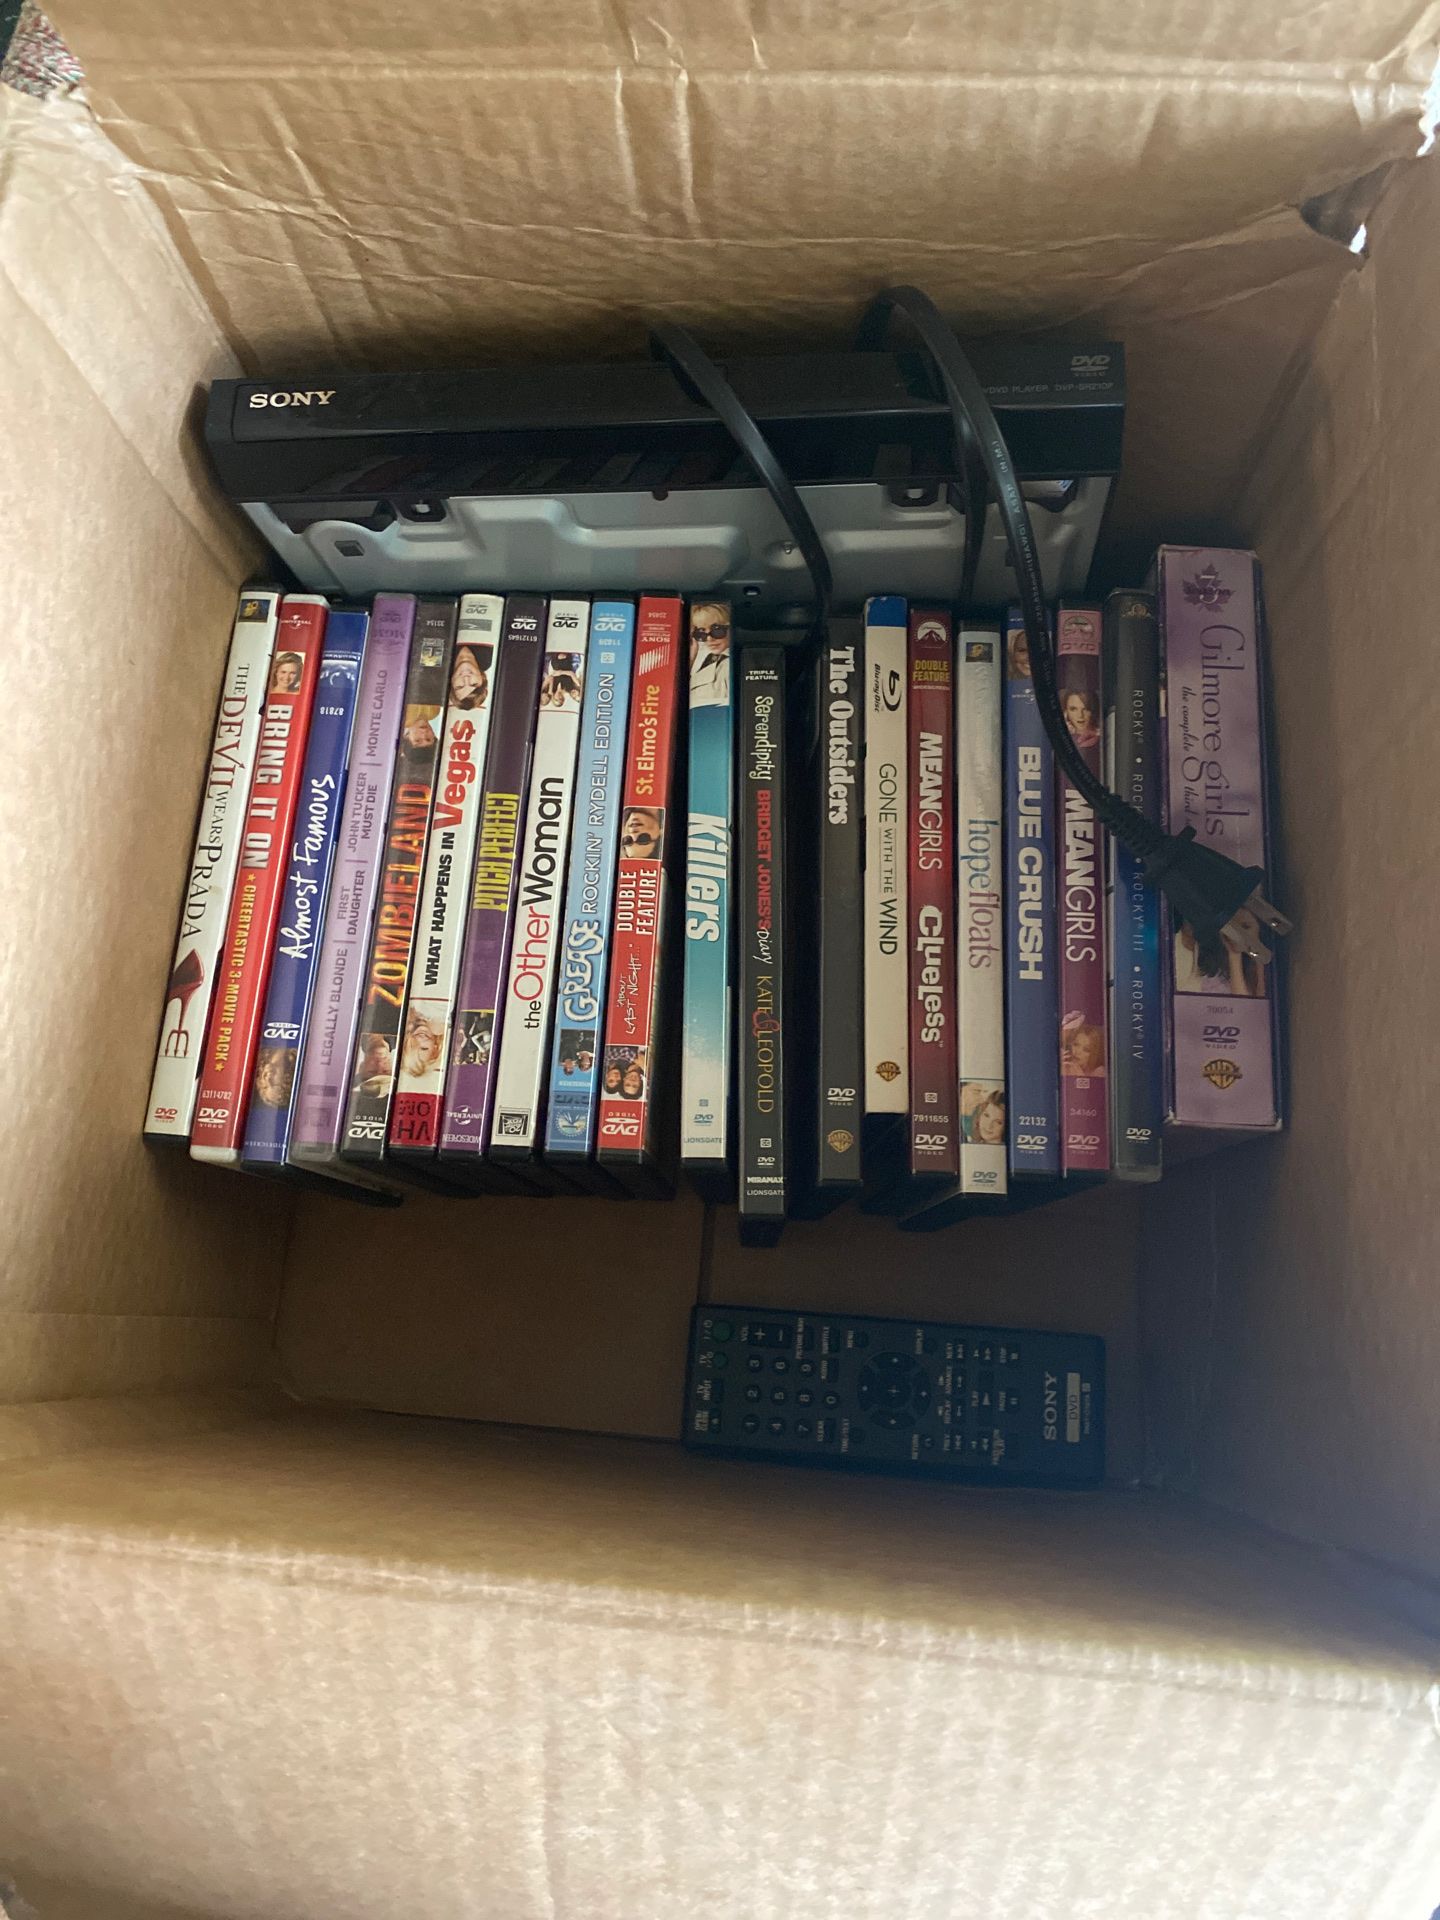 DVD player and box of DVDs